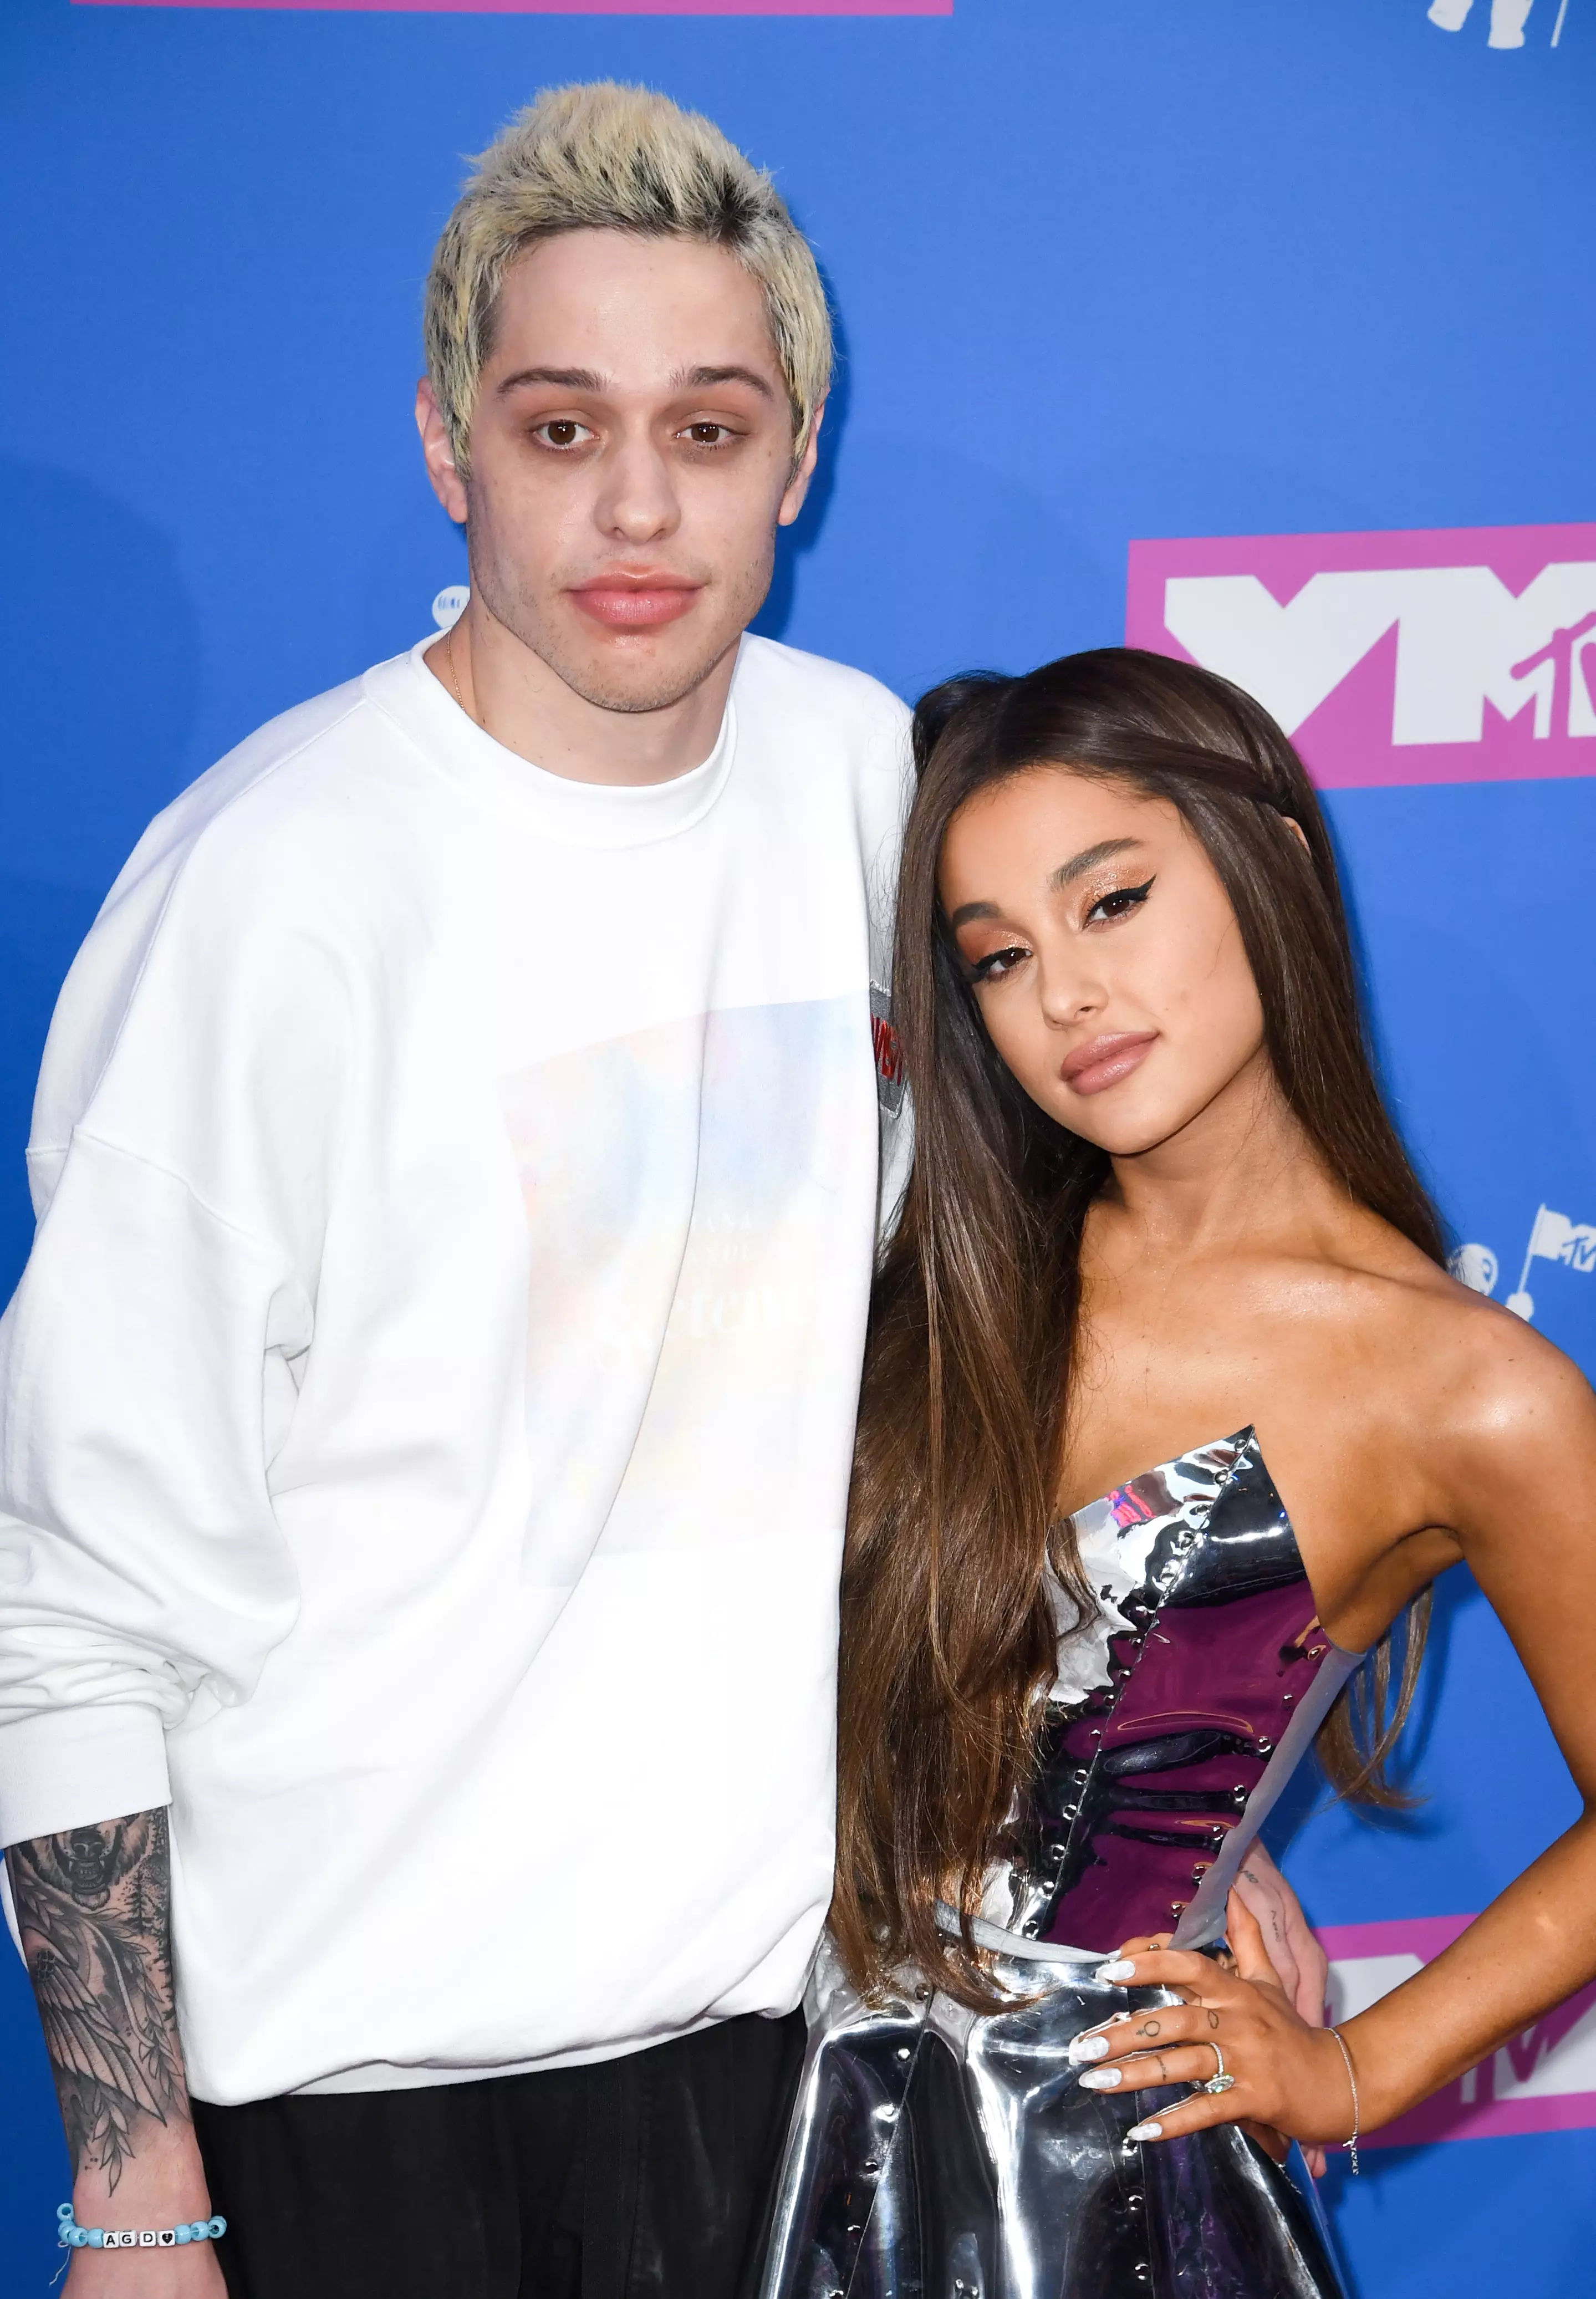 Davidson was engaged to Ariana Grande, but they broke up in 2018.